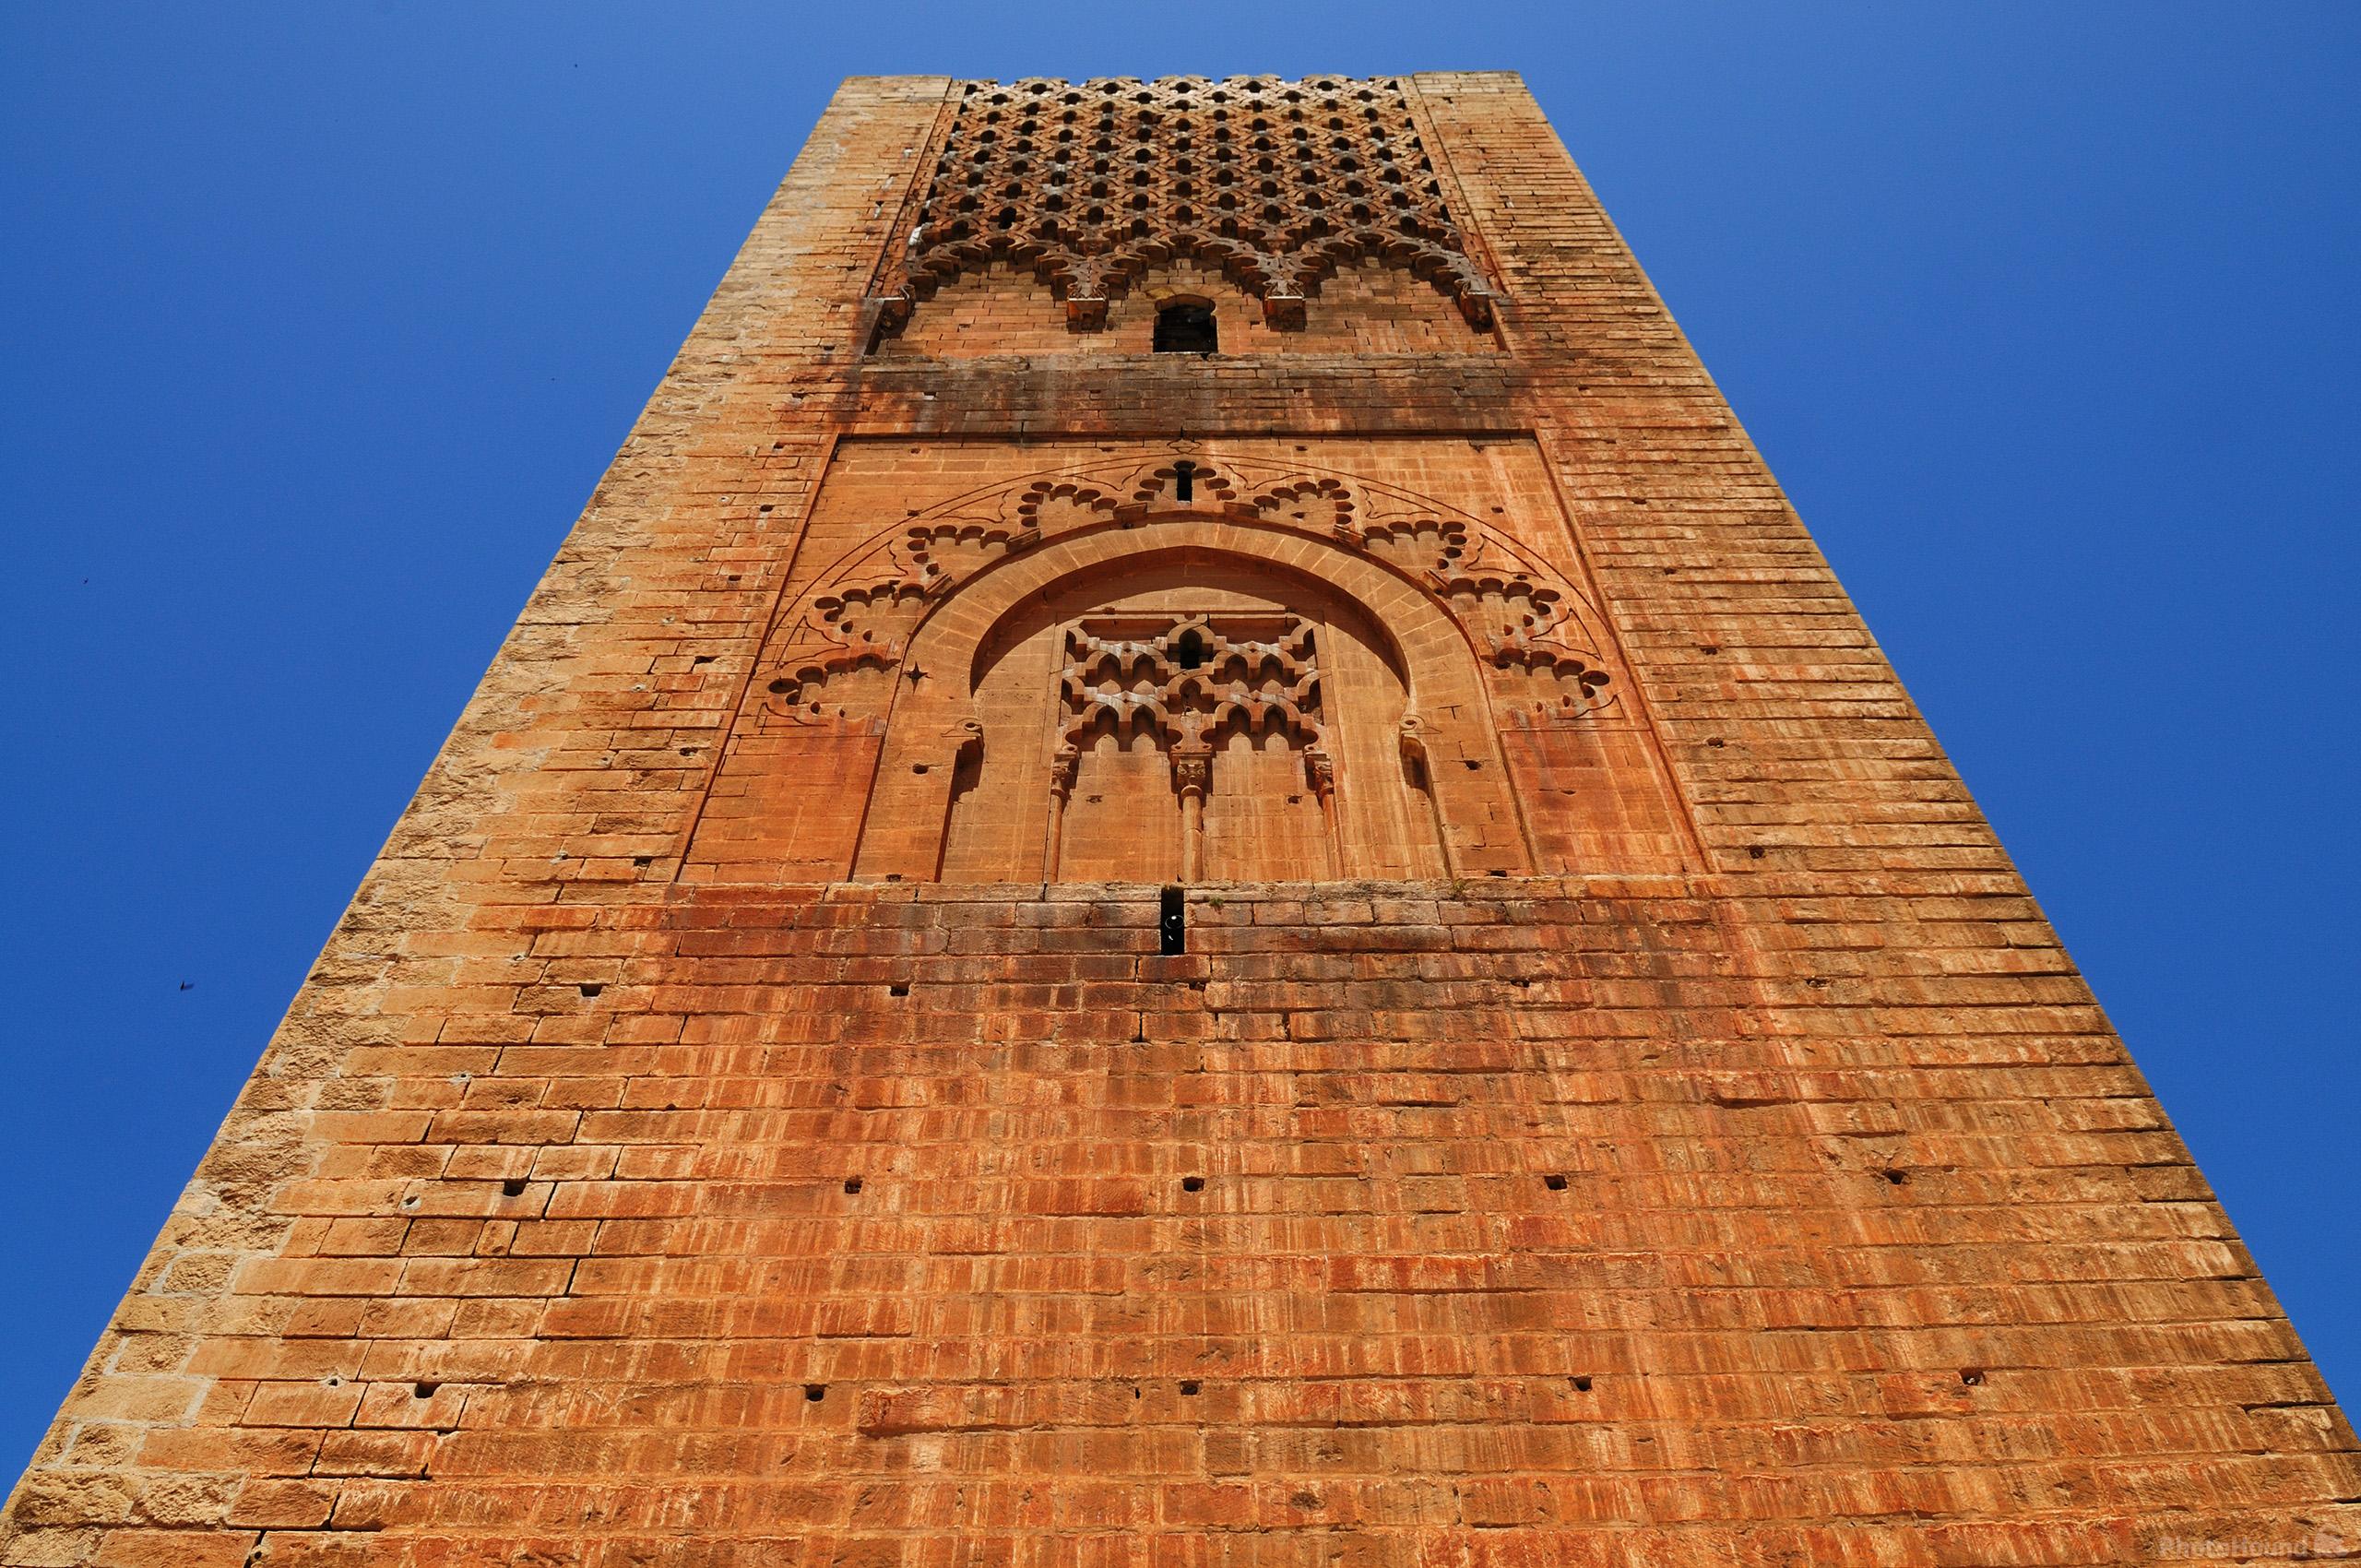 Image of Hassan Tower & Mausoleum of Mohammed V by Luka Esenko